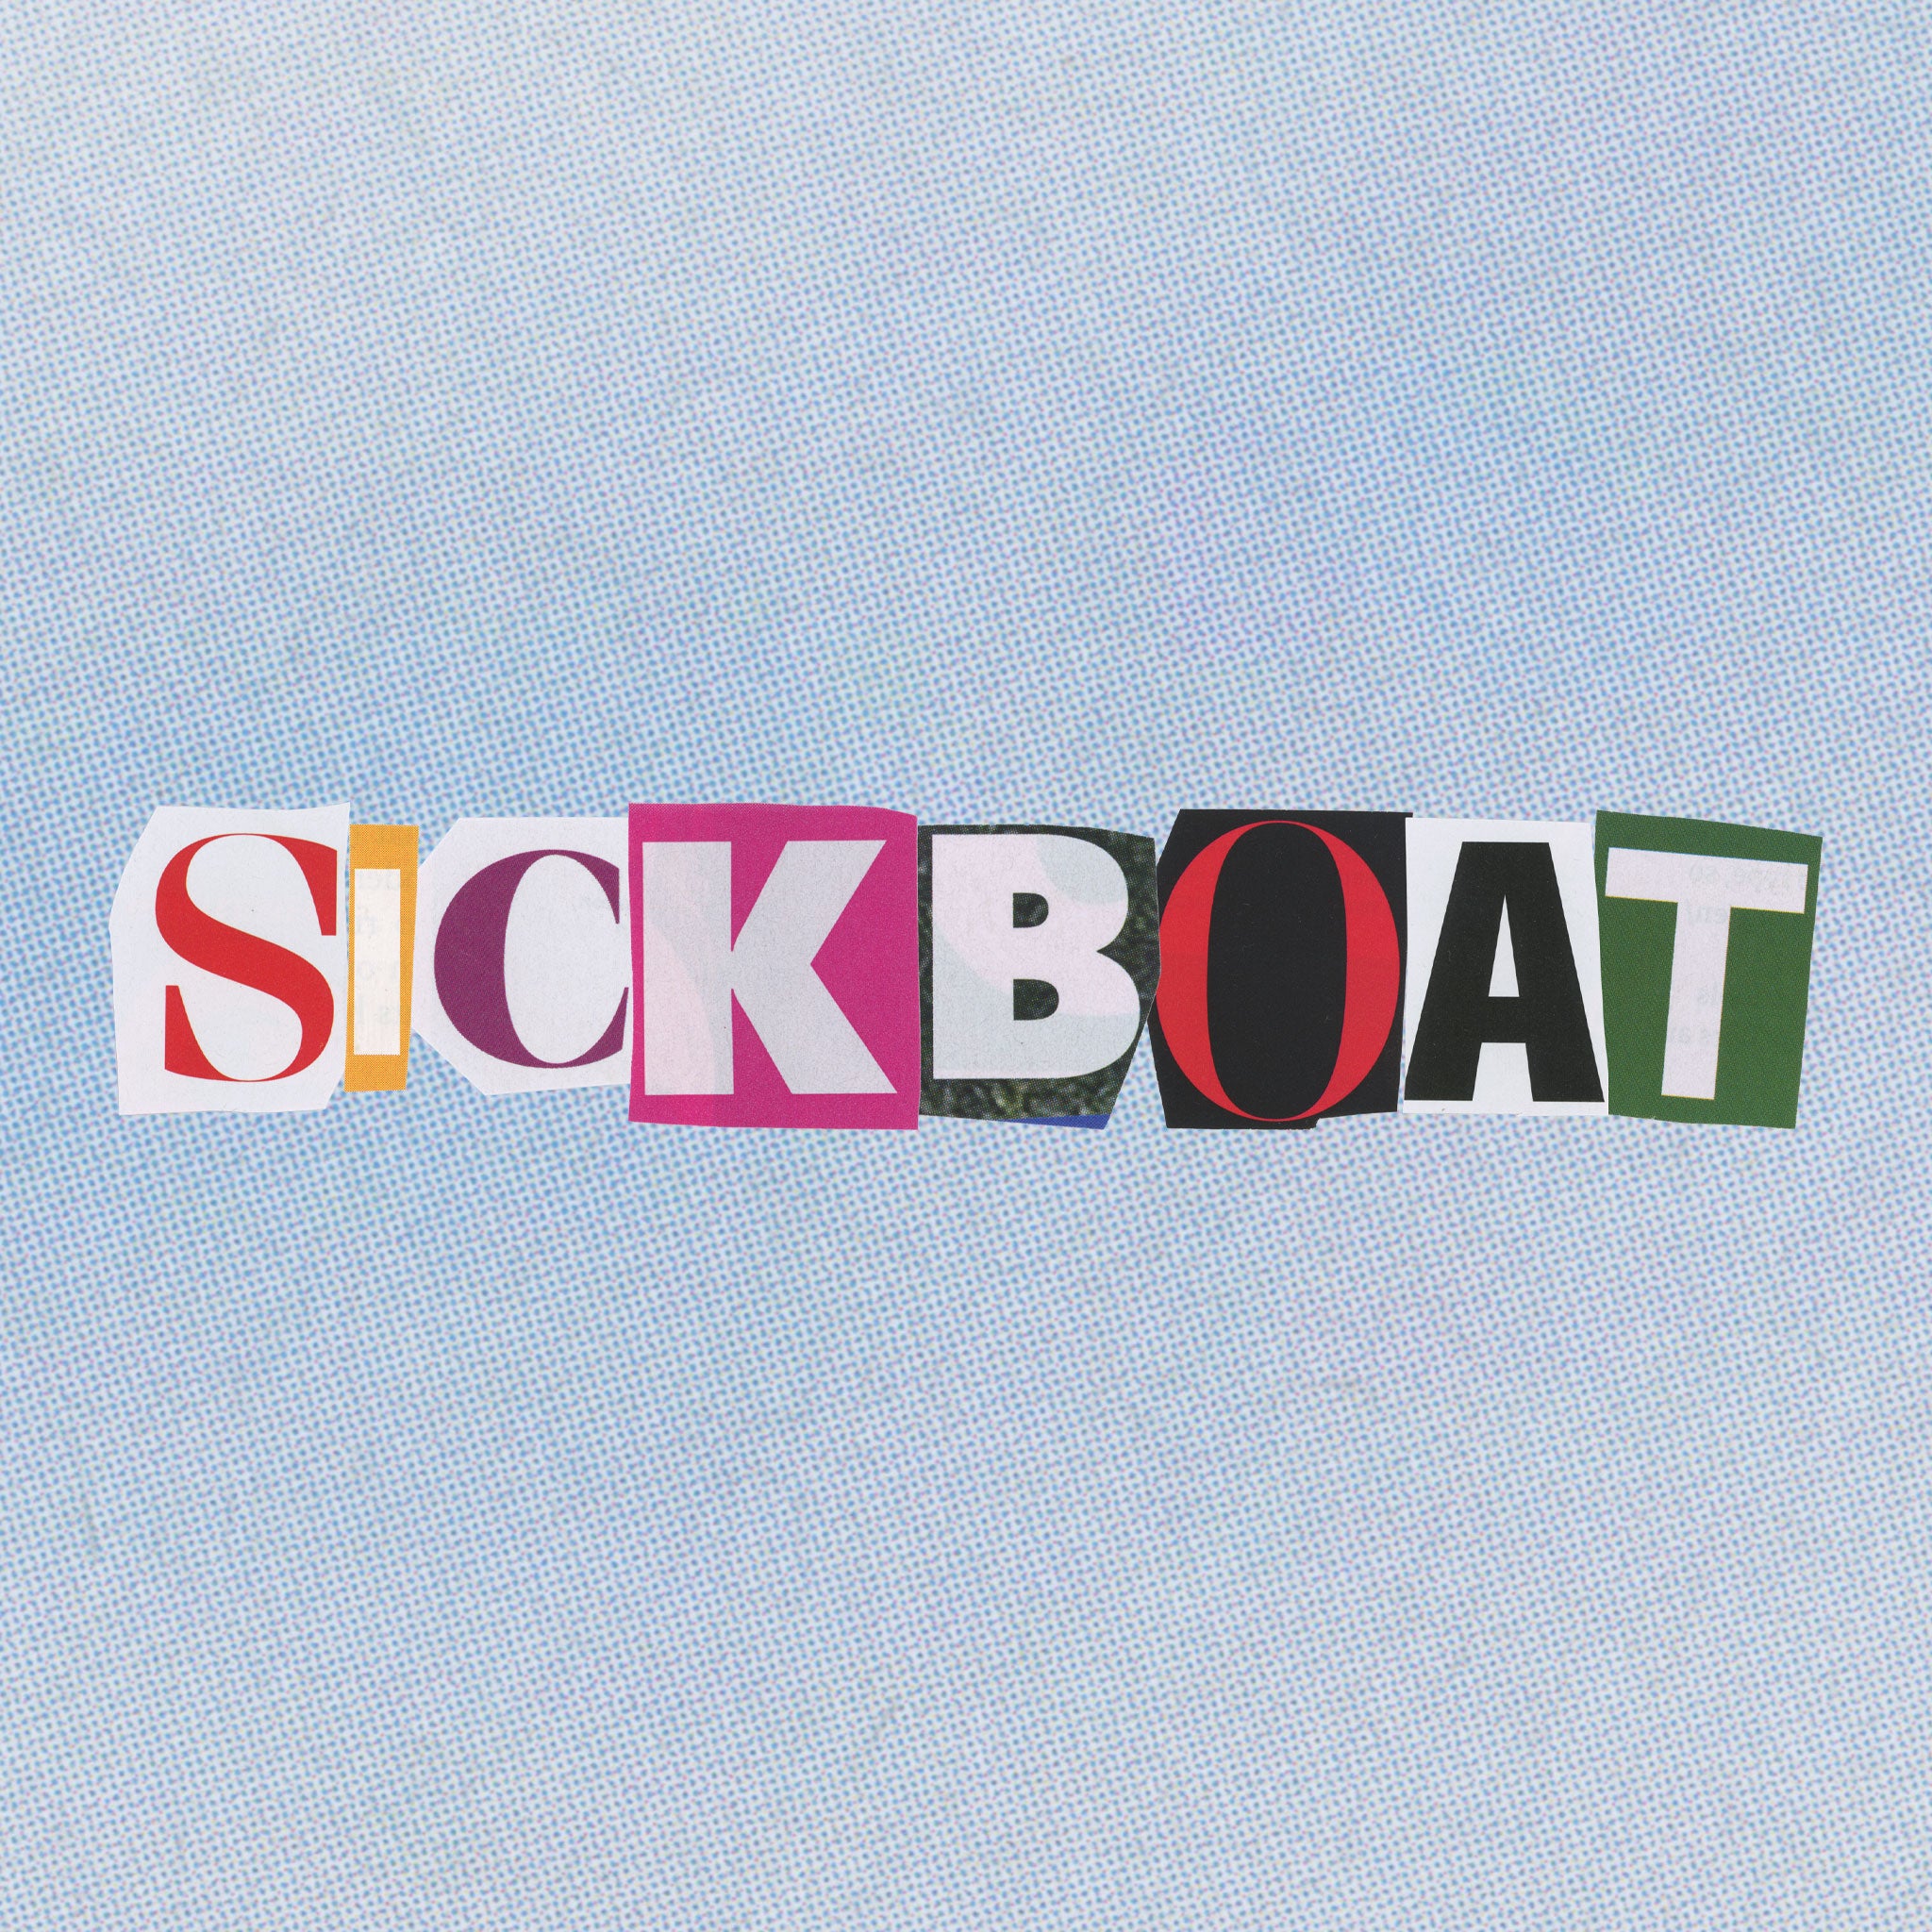 Magazine Cut Out Letters Png Animations Sickboat